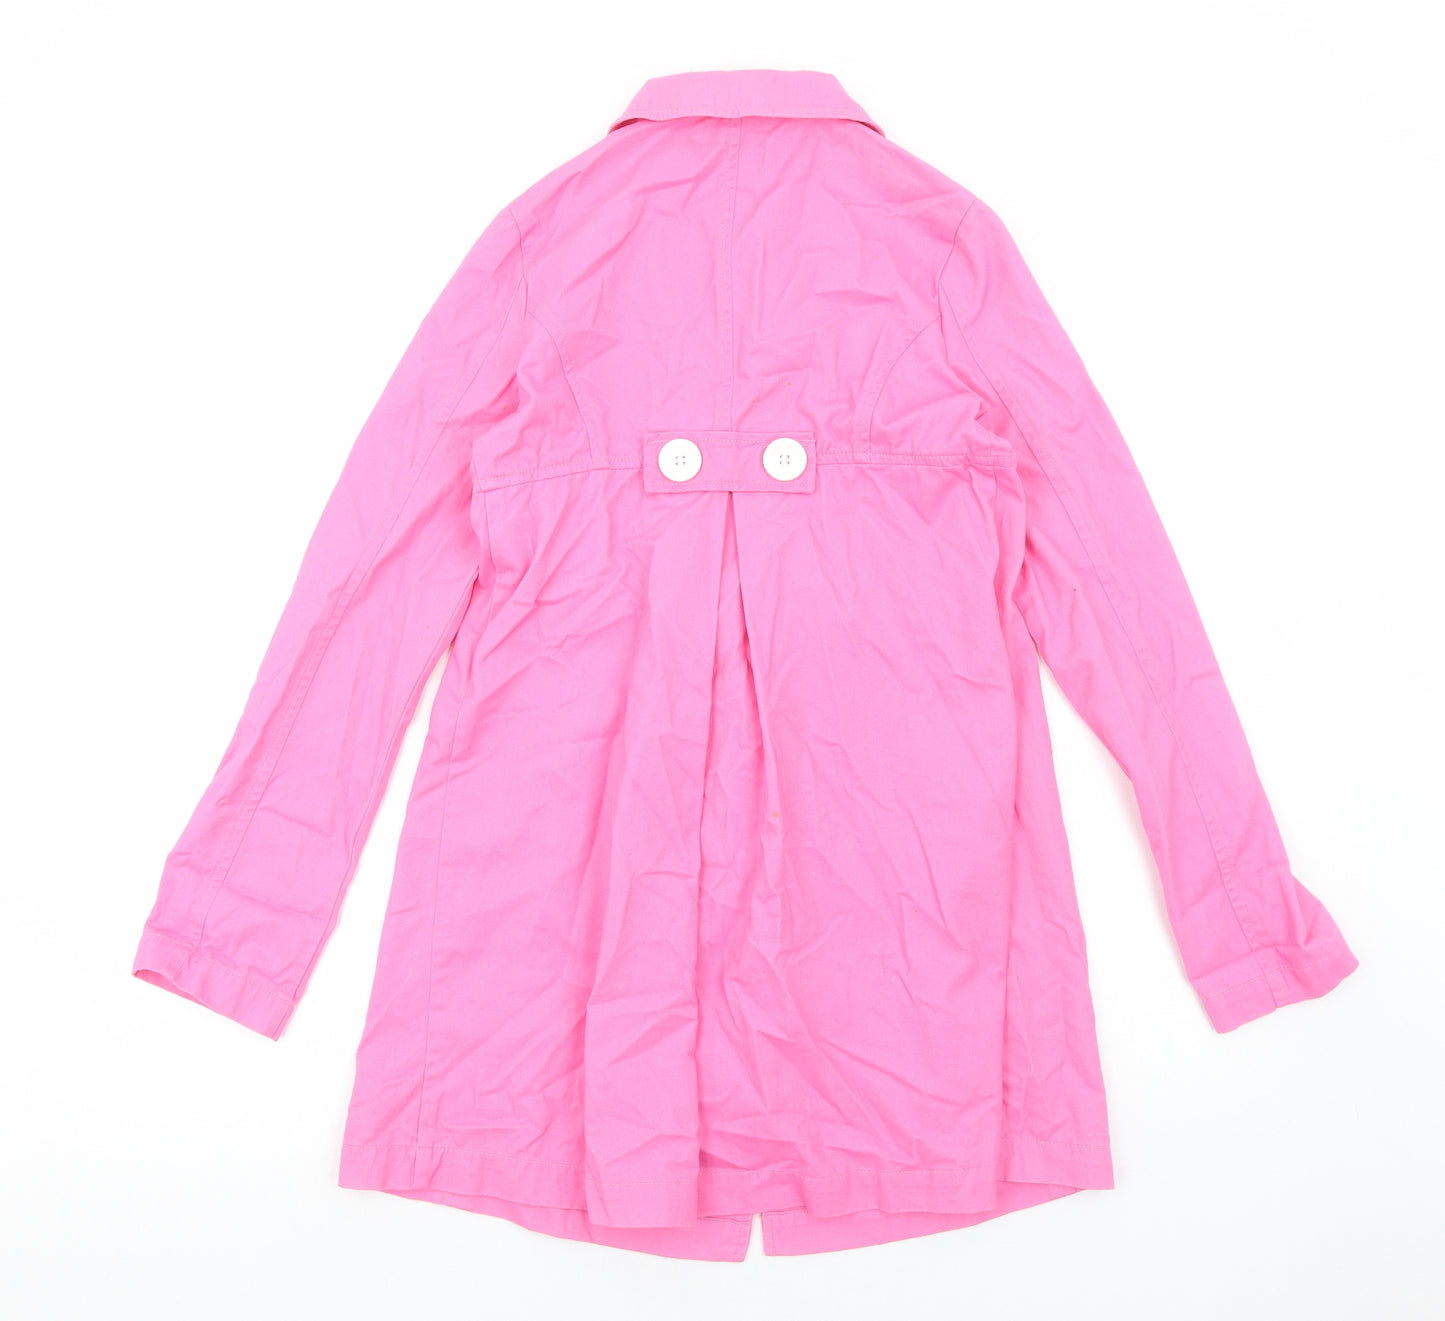 United Colors of Benetton Girls Pink Pea Coat Coat Size 11-12 Years Button